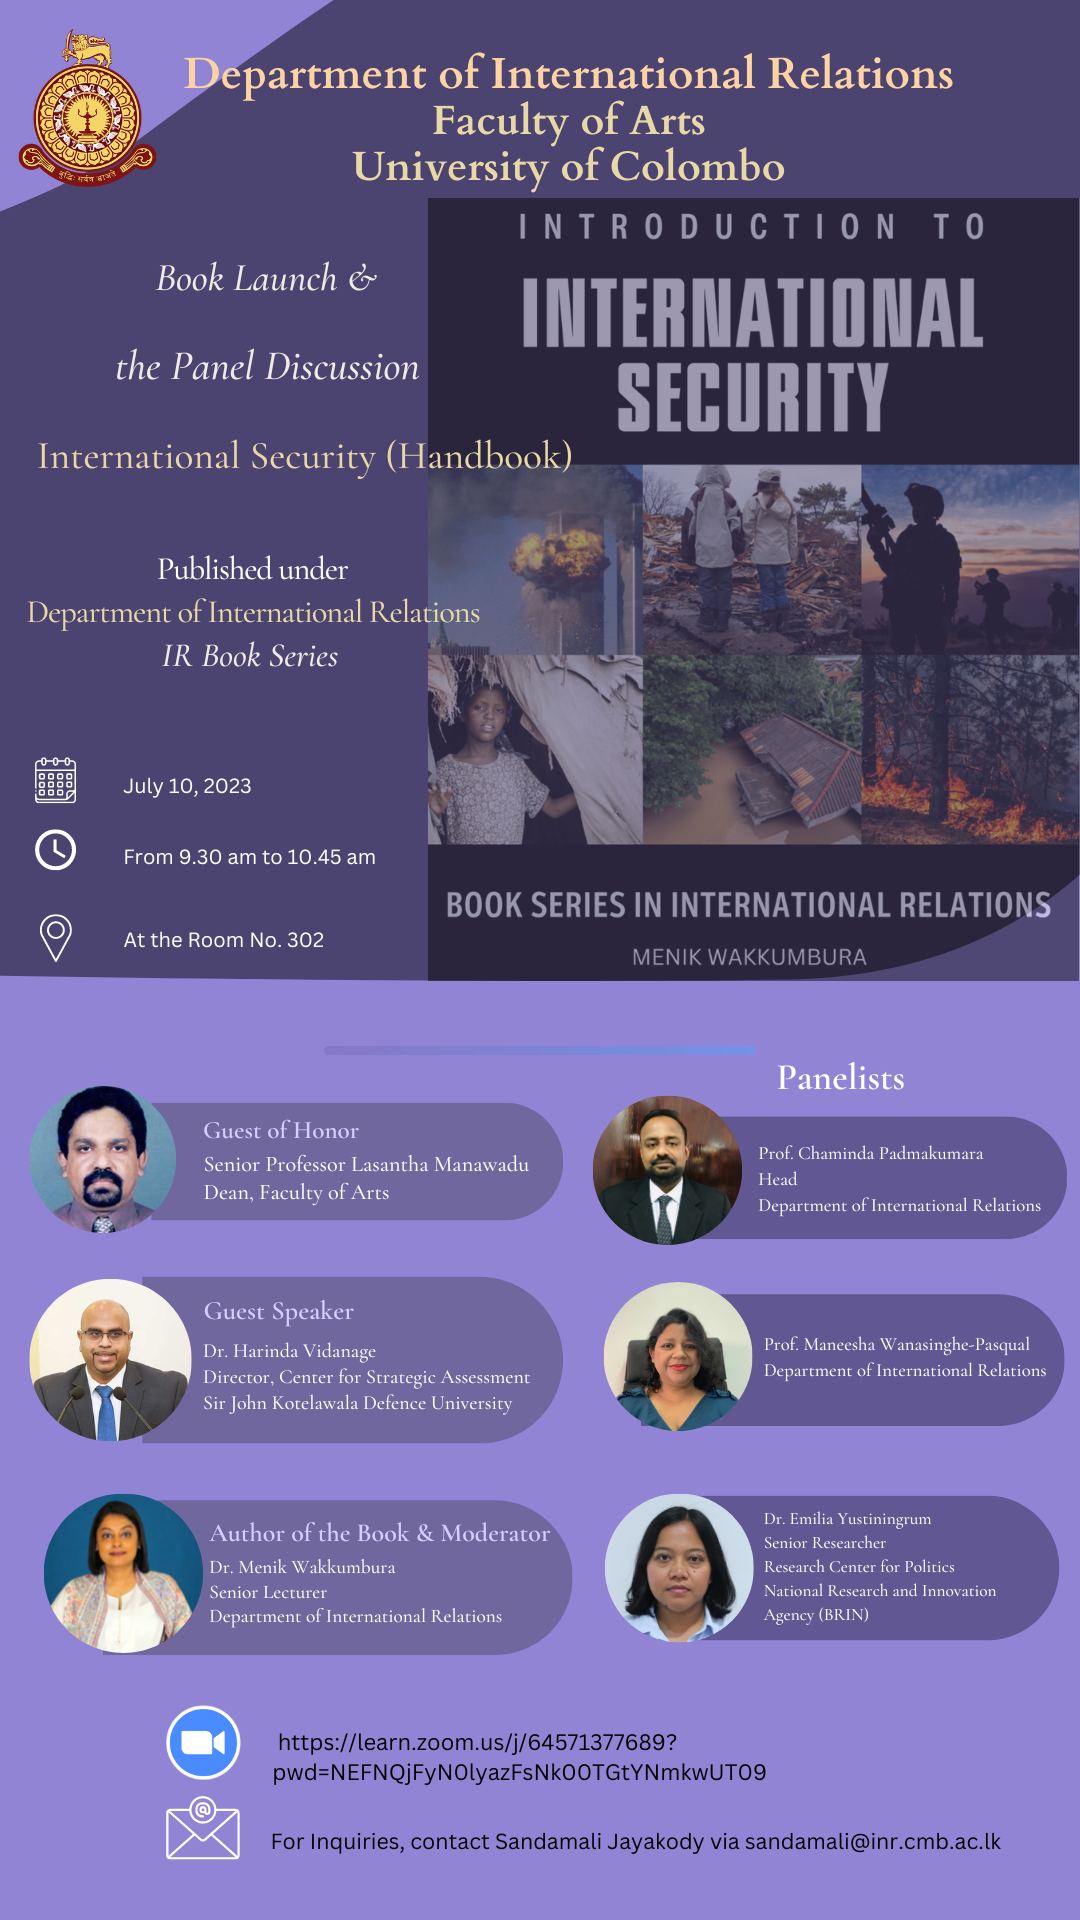 International Security Book Launch & Panel Discussion